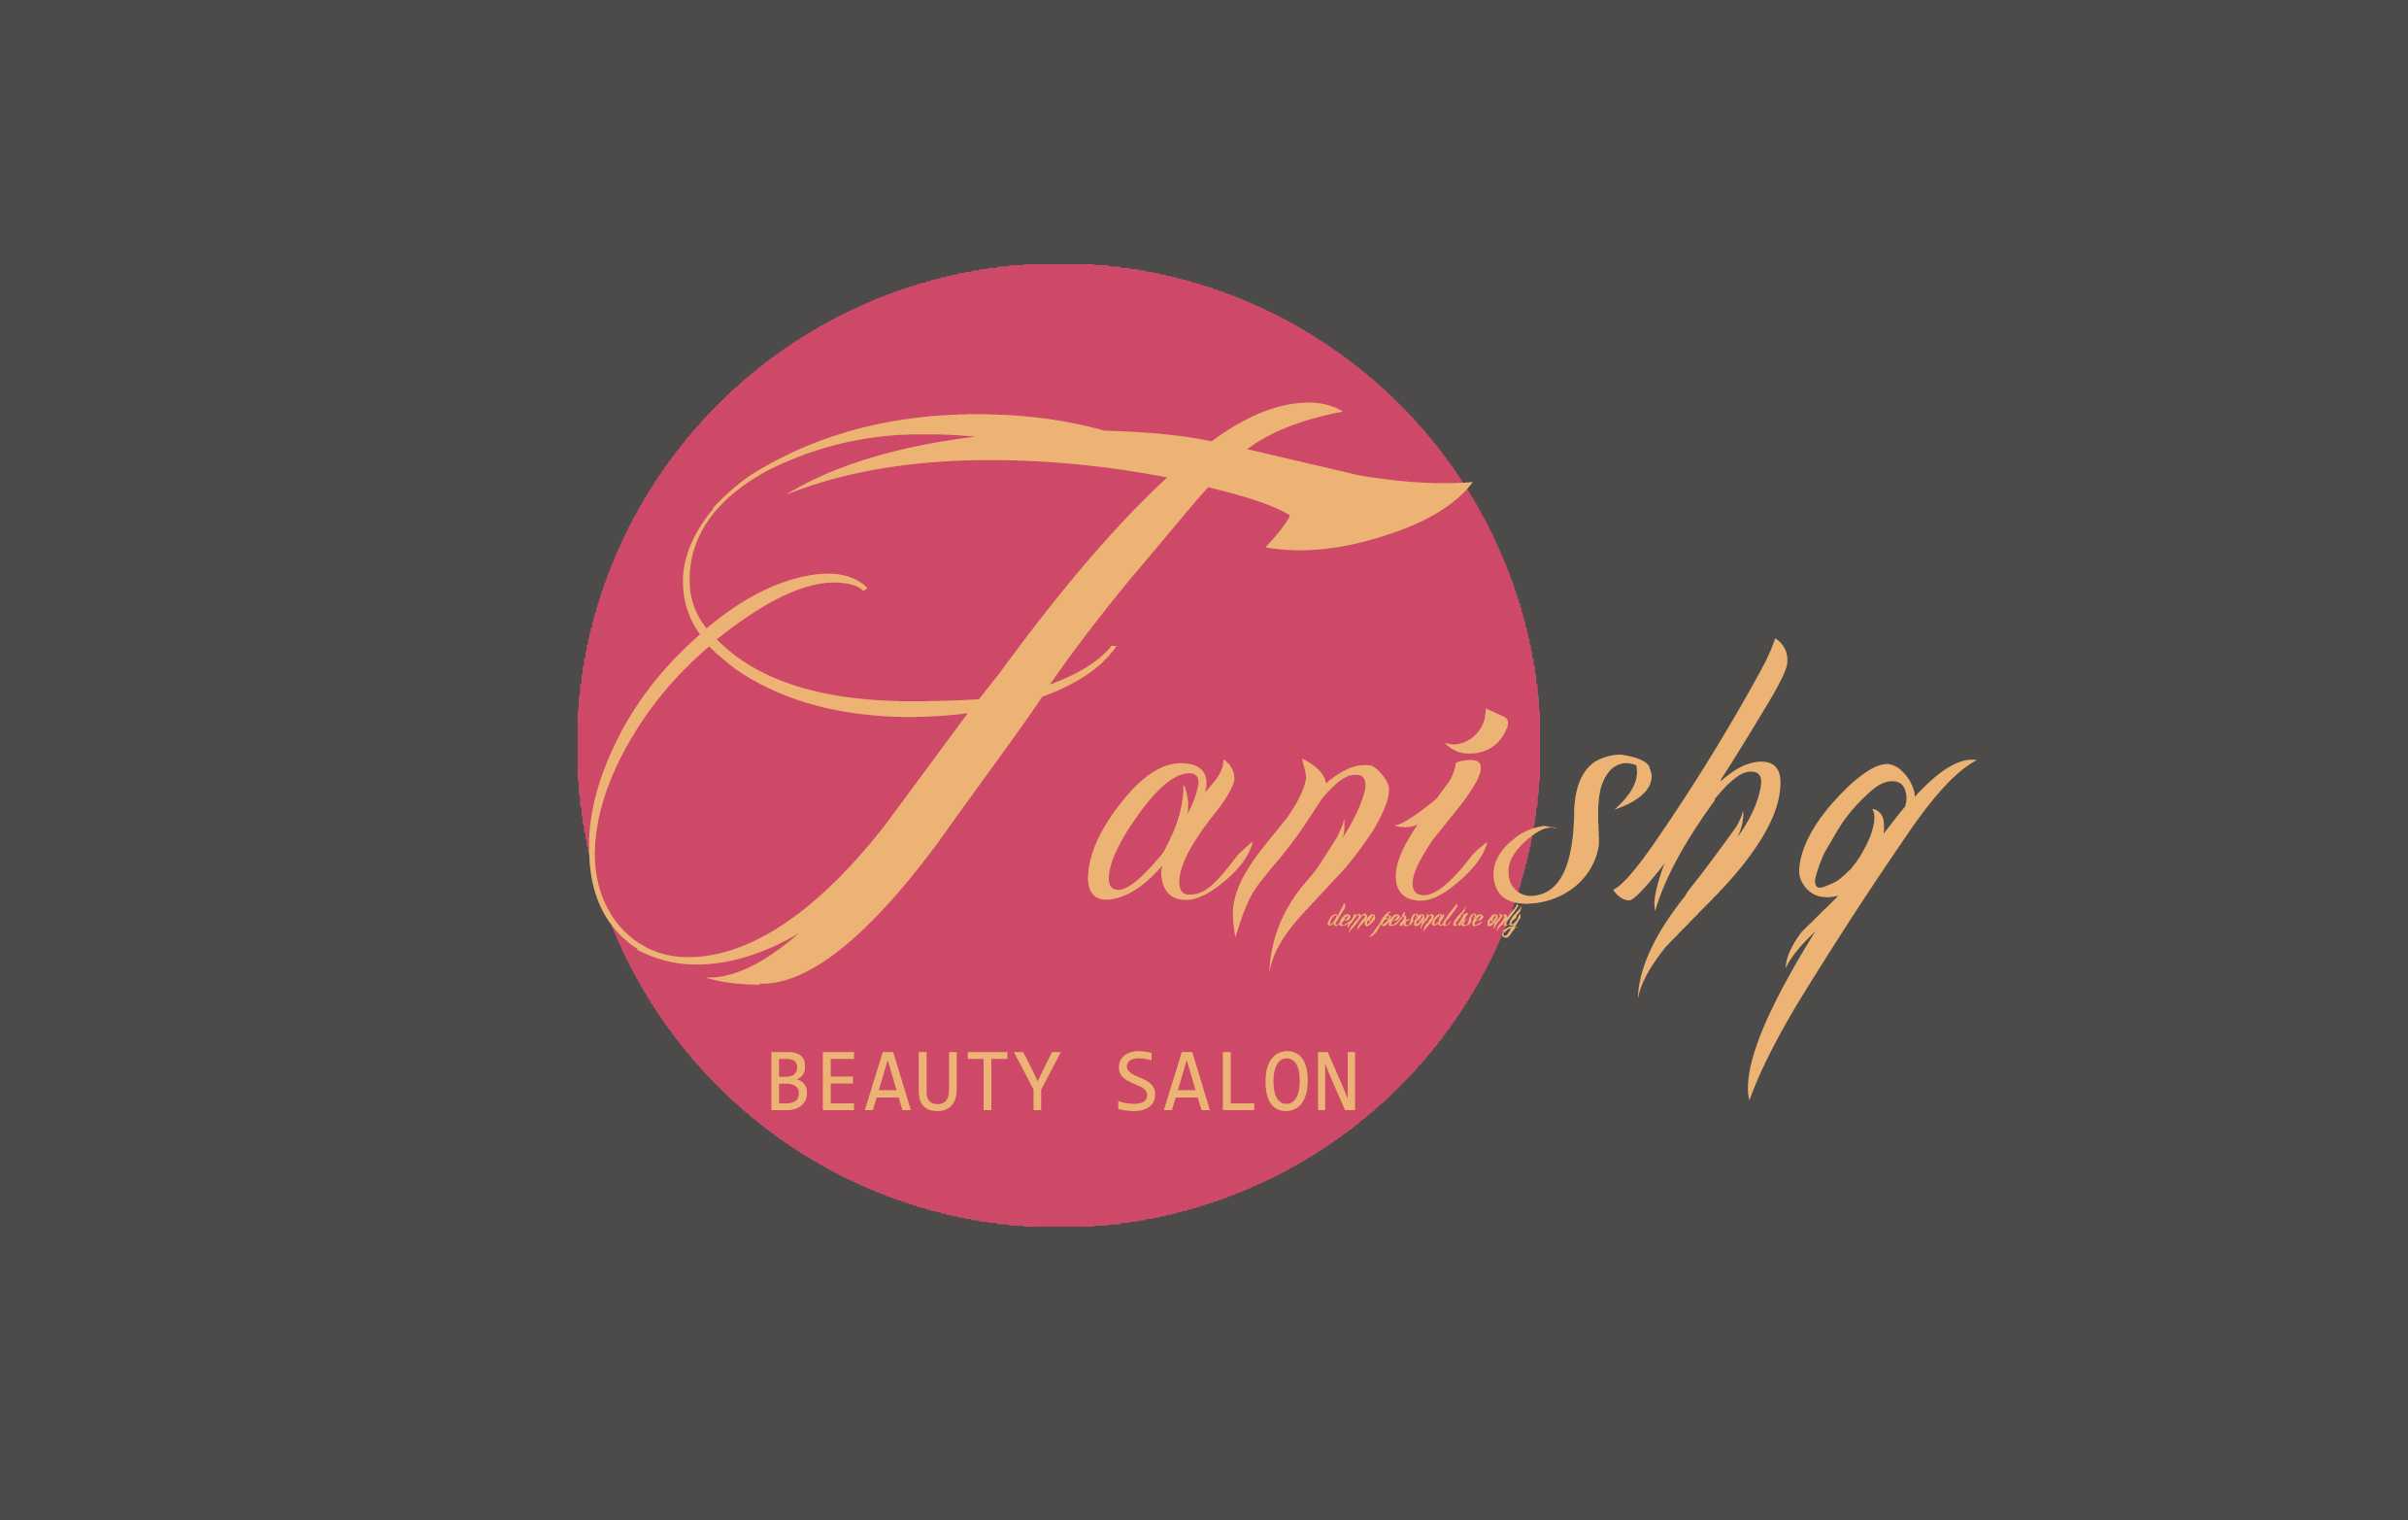 Tanishq A Beauty Salon in Indore H O, Indore-452010 | Sulekha Indore